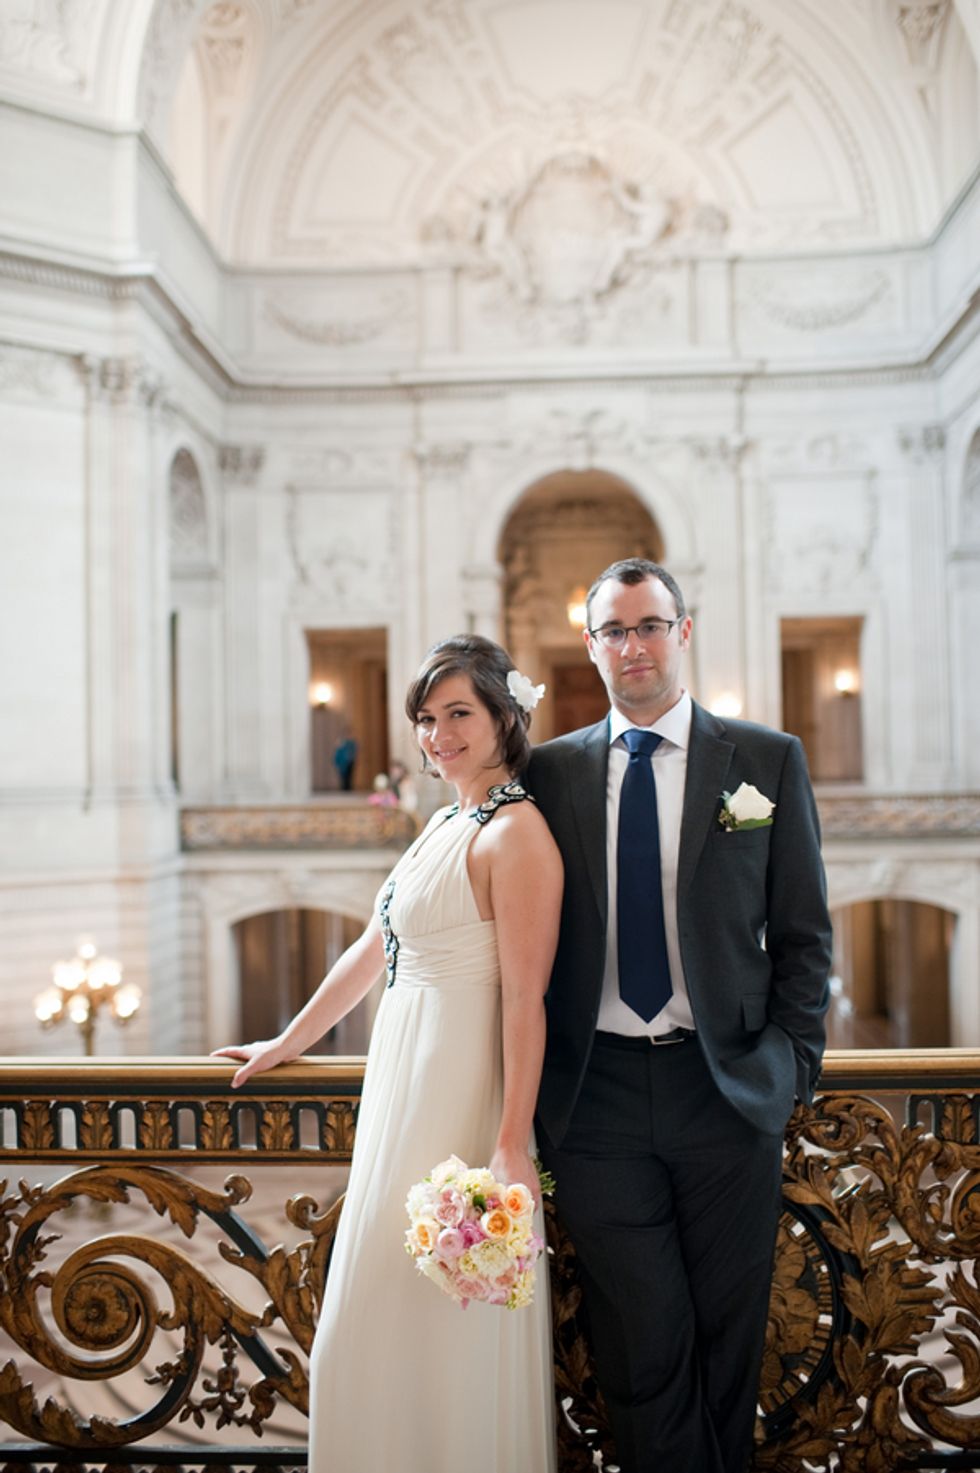 A Peek Inside Lise and Ben's Intimate City Hall Ceremony